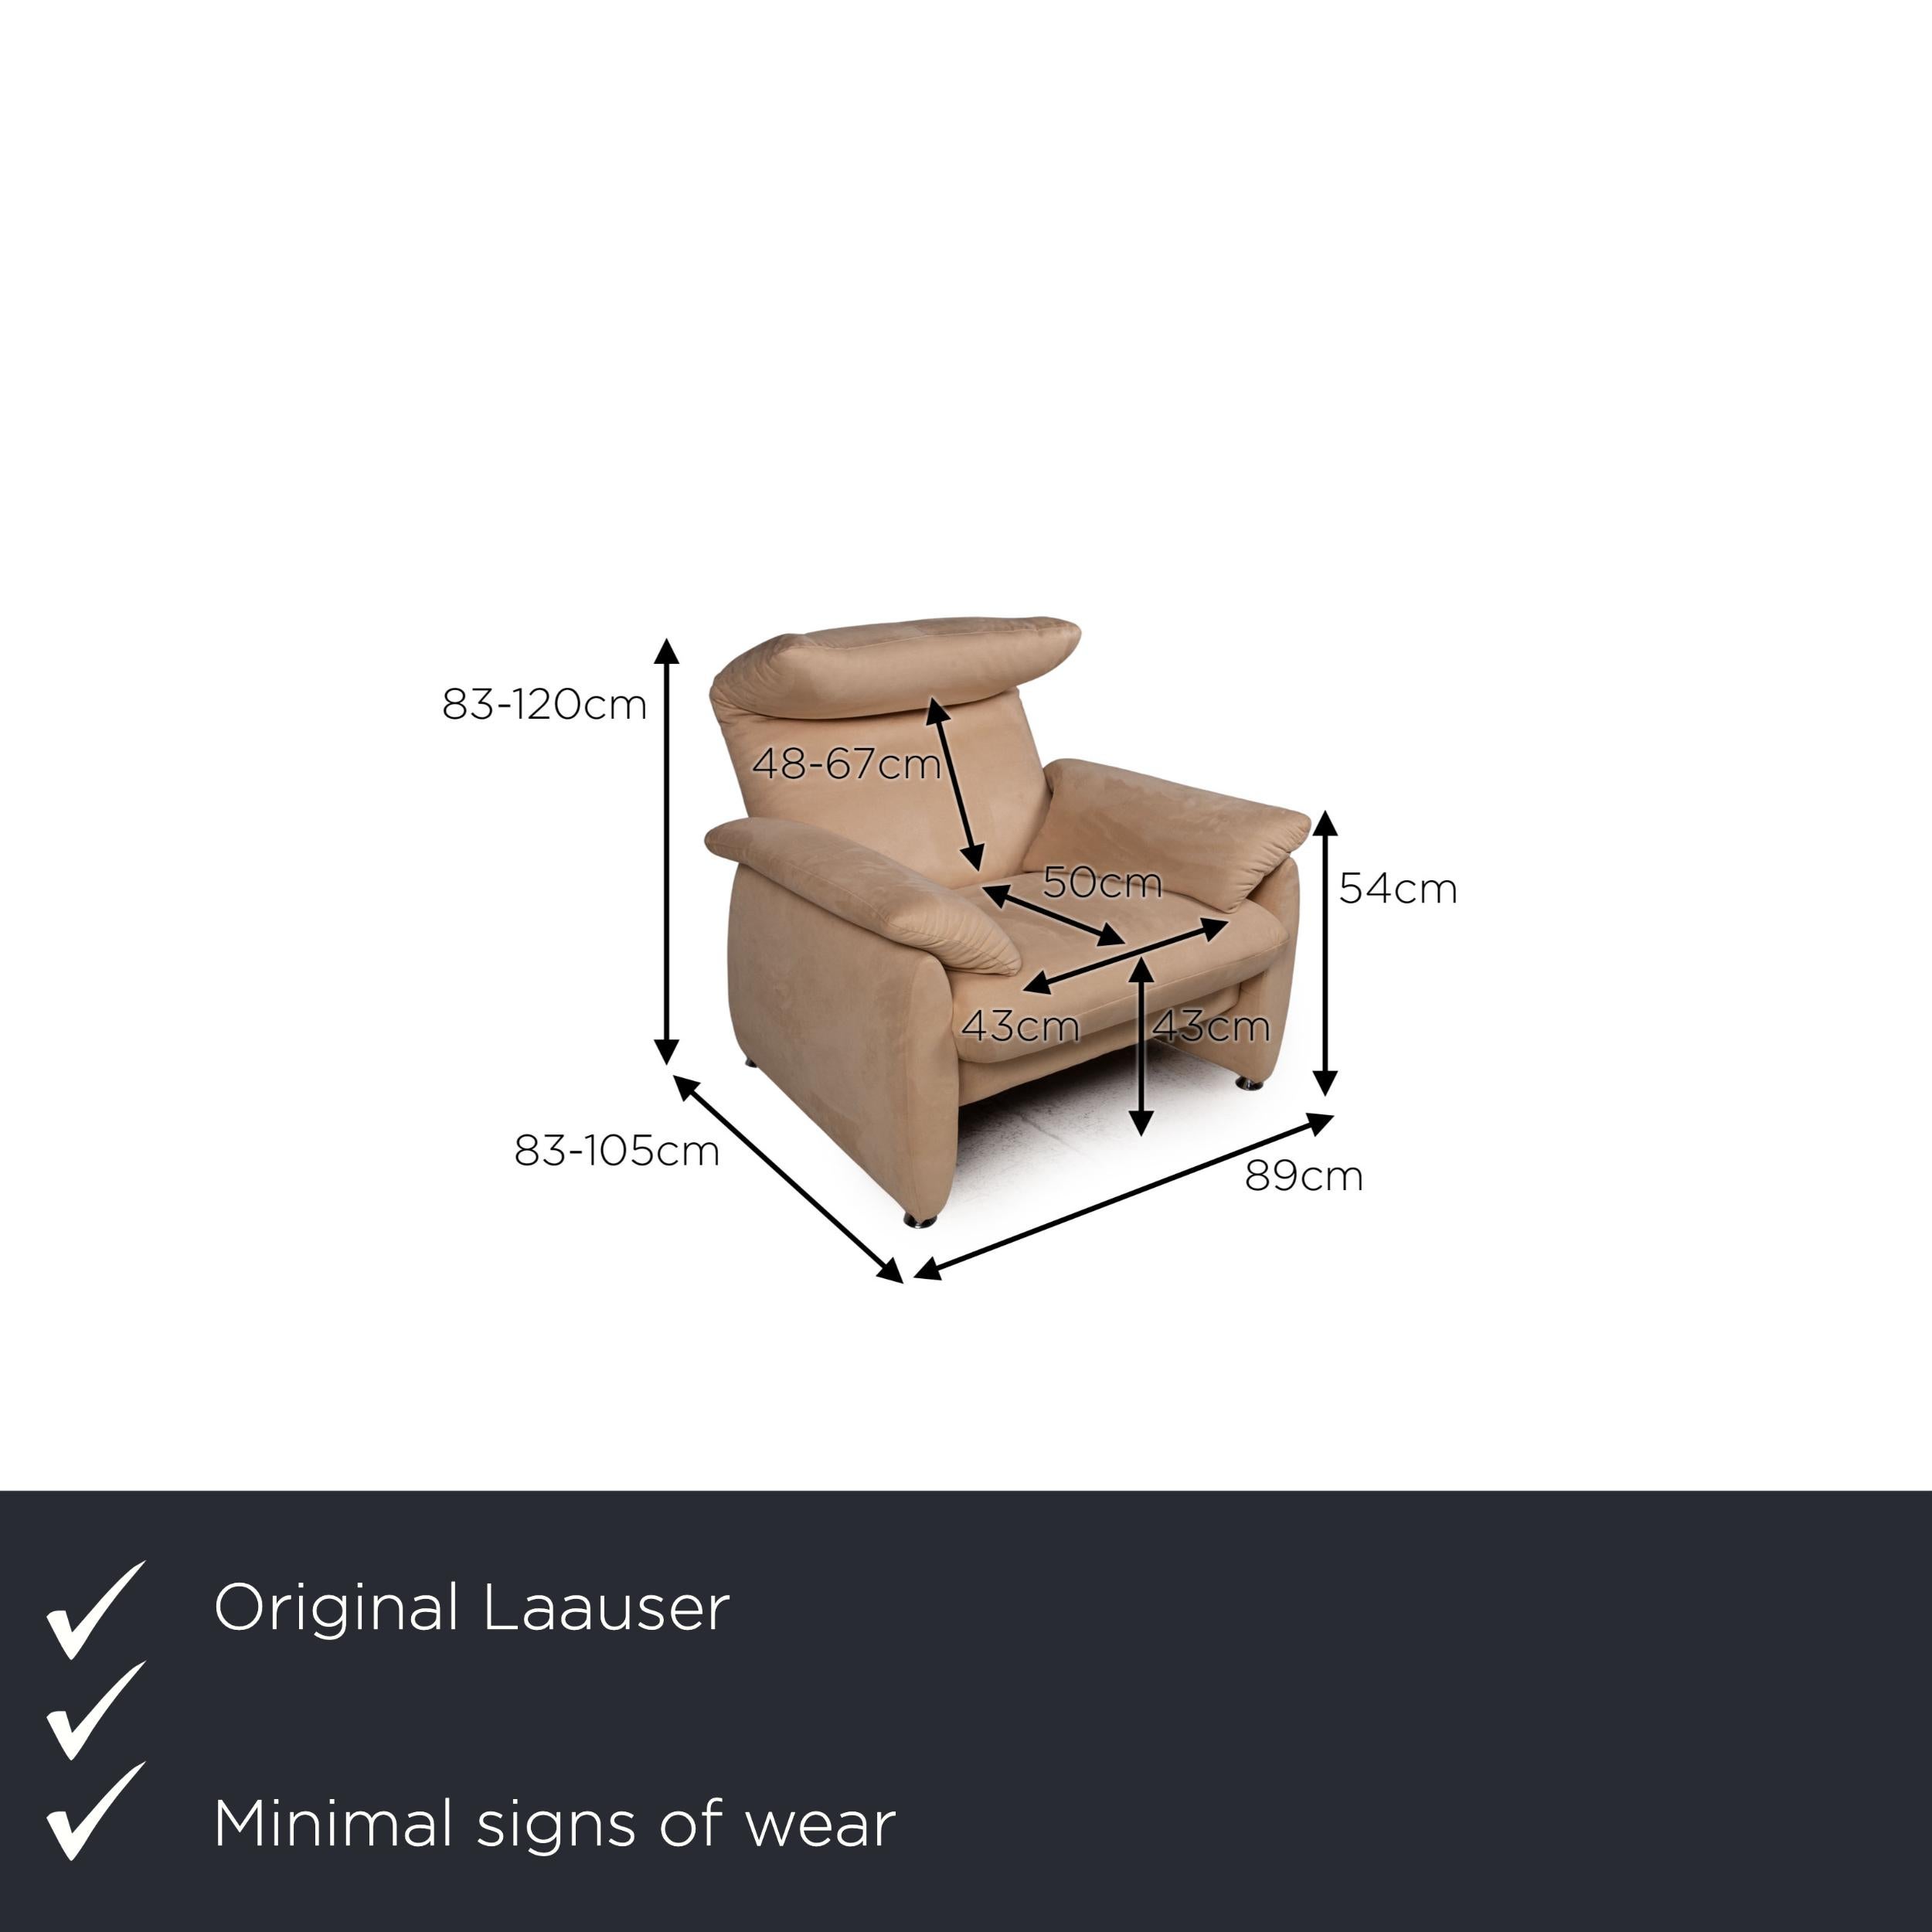 We present to you a Laauser Dacapo fabric armchair beige function.

Product measurements in centimeters:

depth: 83
width: 89
height: 83
seat height: 43
rest height: 54
seat depth: 50
seat width: 43
back height: 48.

 